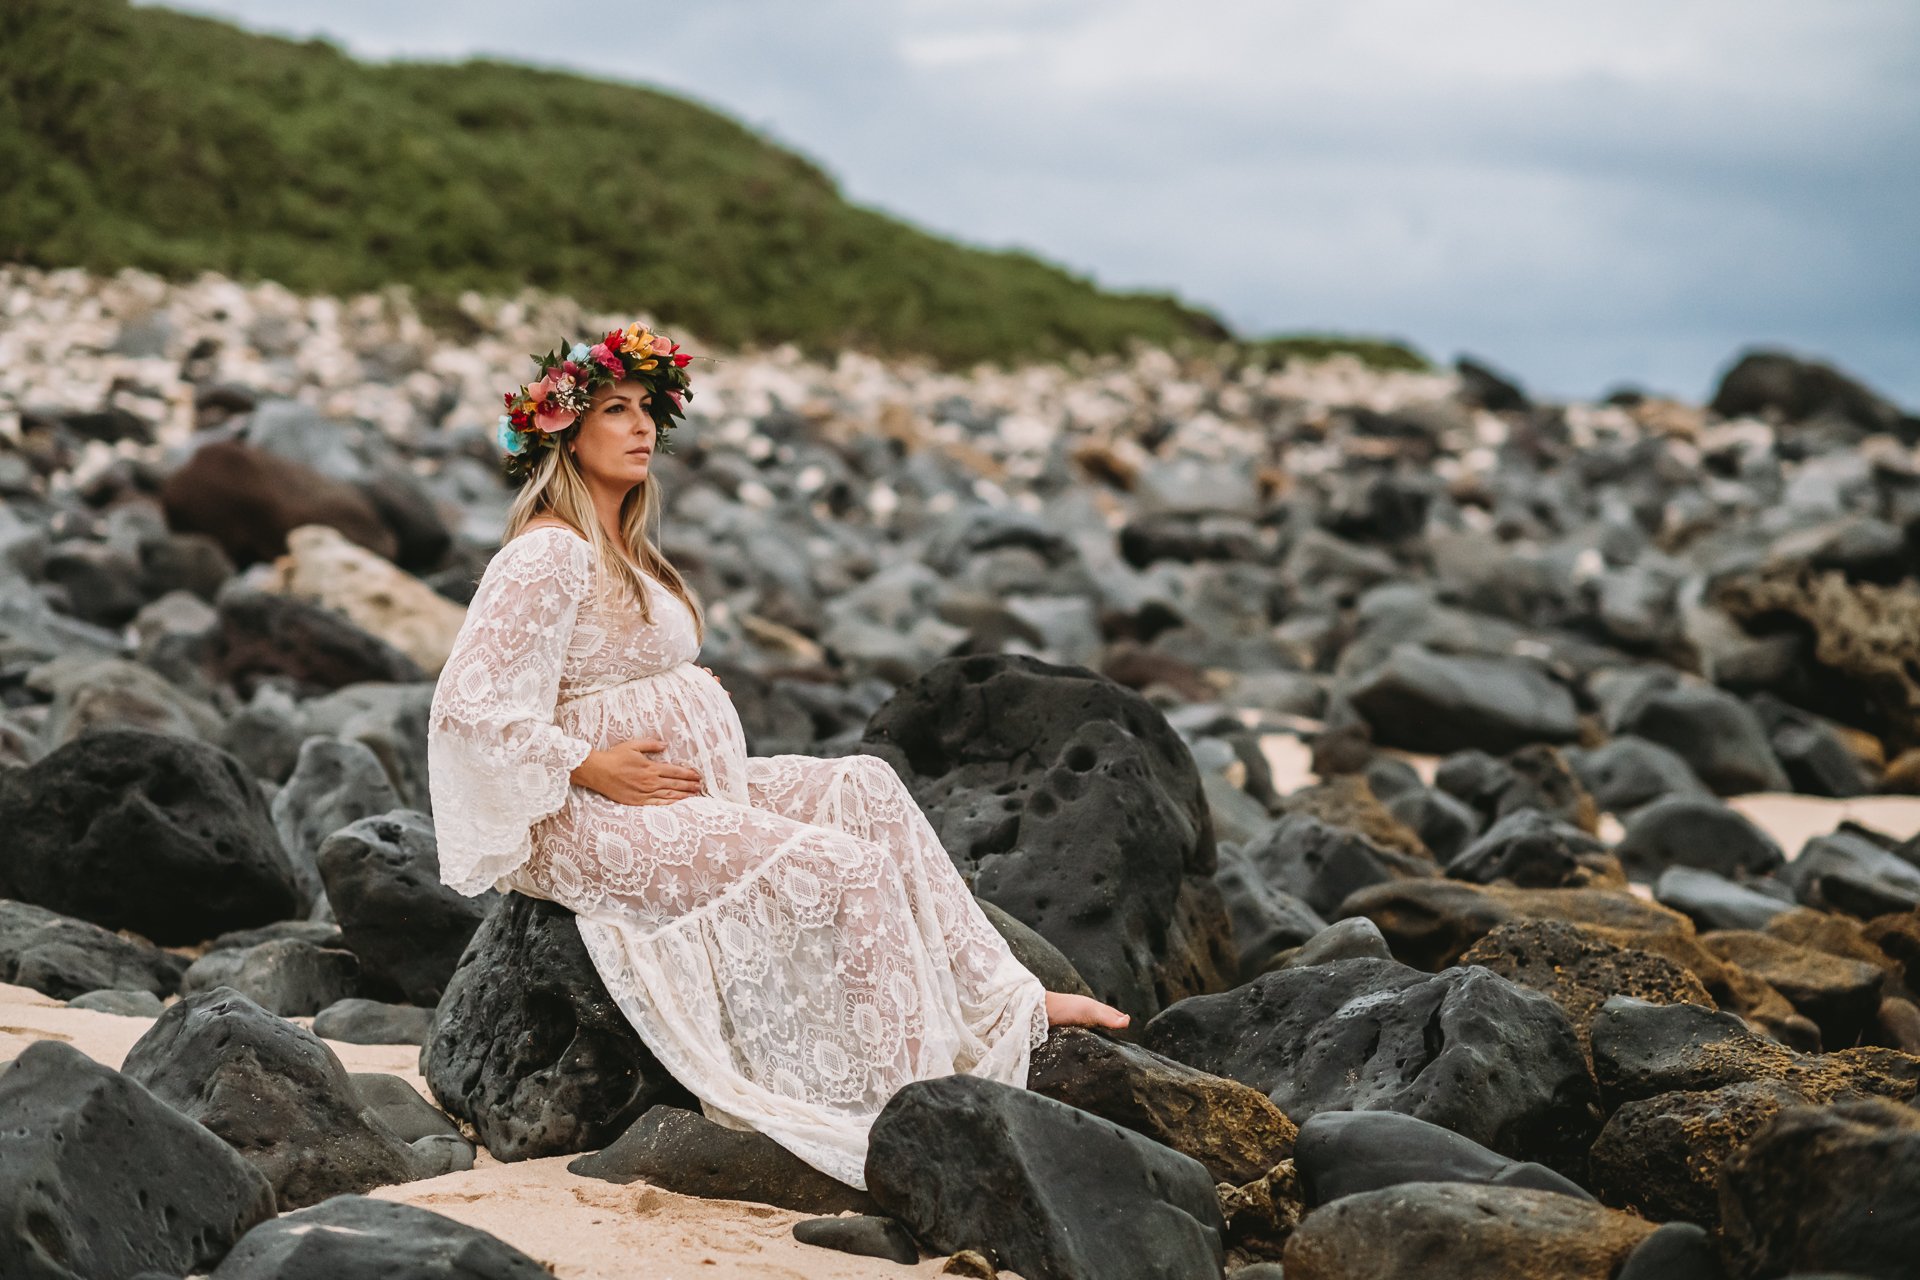 Kaena-Point-North-Shore-Oahu-Hawaii-Maternity-Session-Flower-Crown-Gown-Sarah-Elizabeth-Photos-and-film-maternity--16.jpg